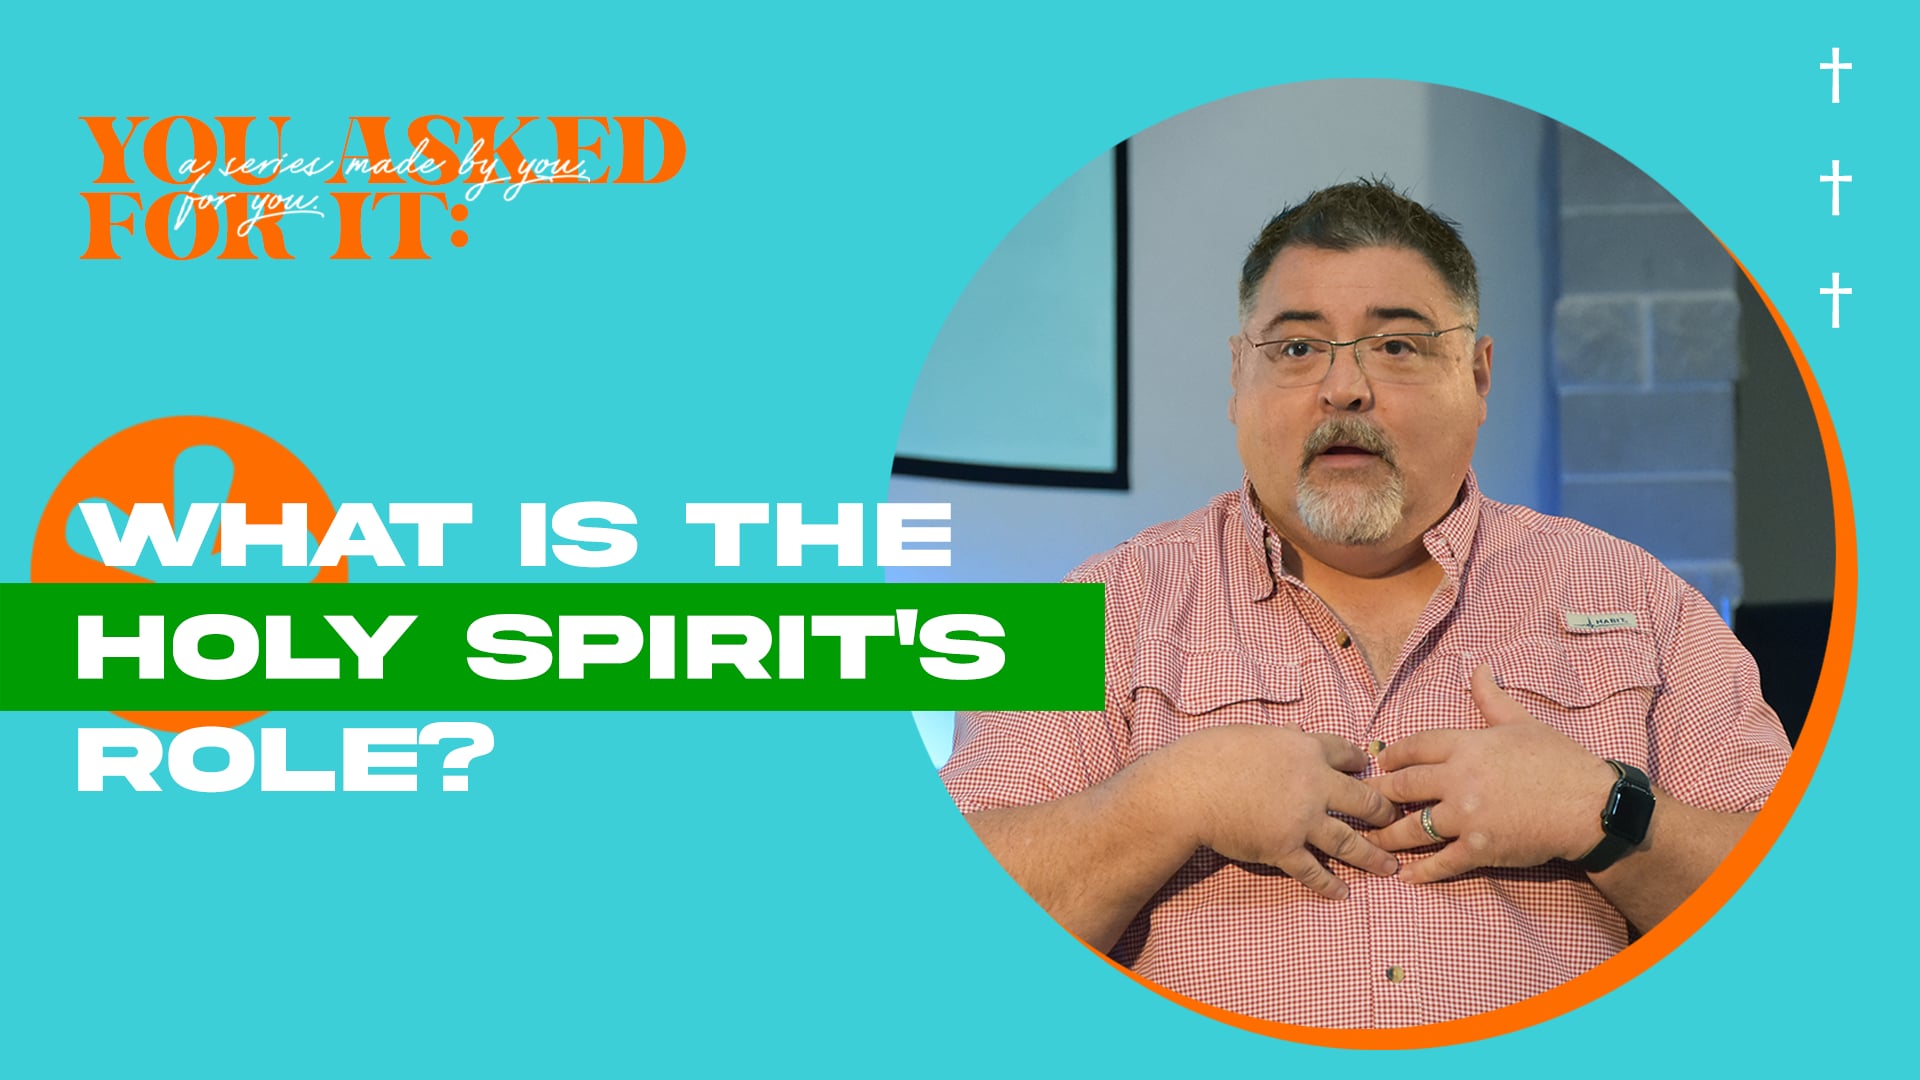 What is the Role of the Holy Spirit?